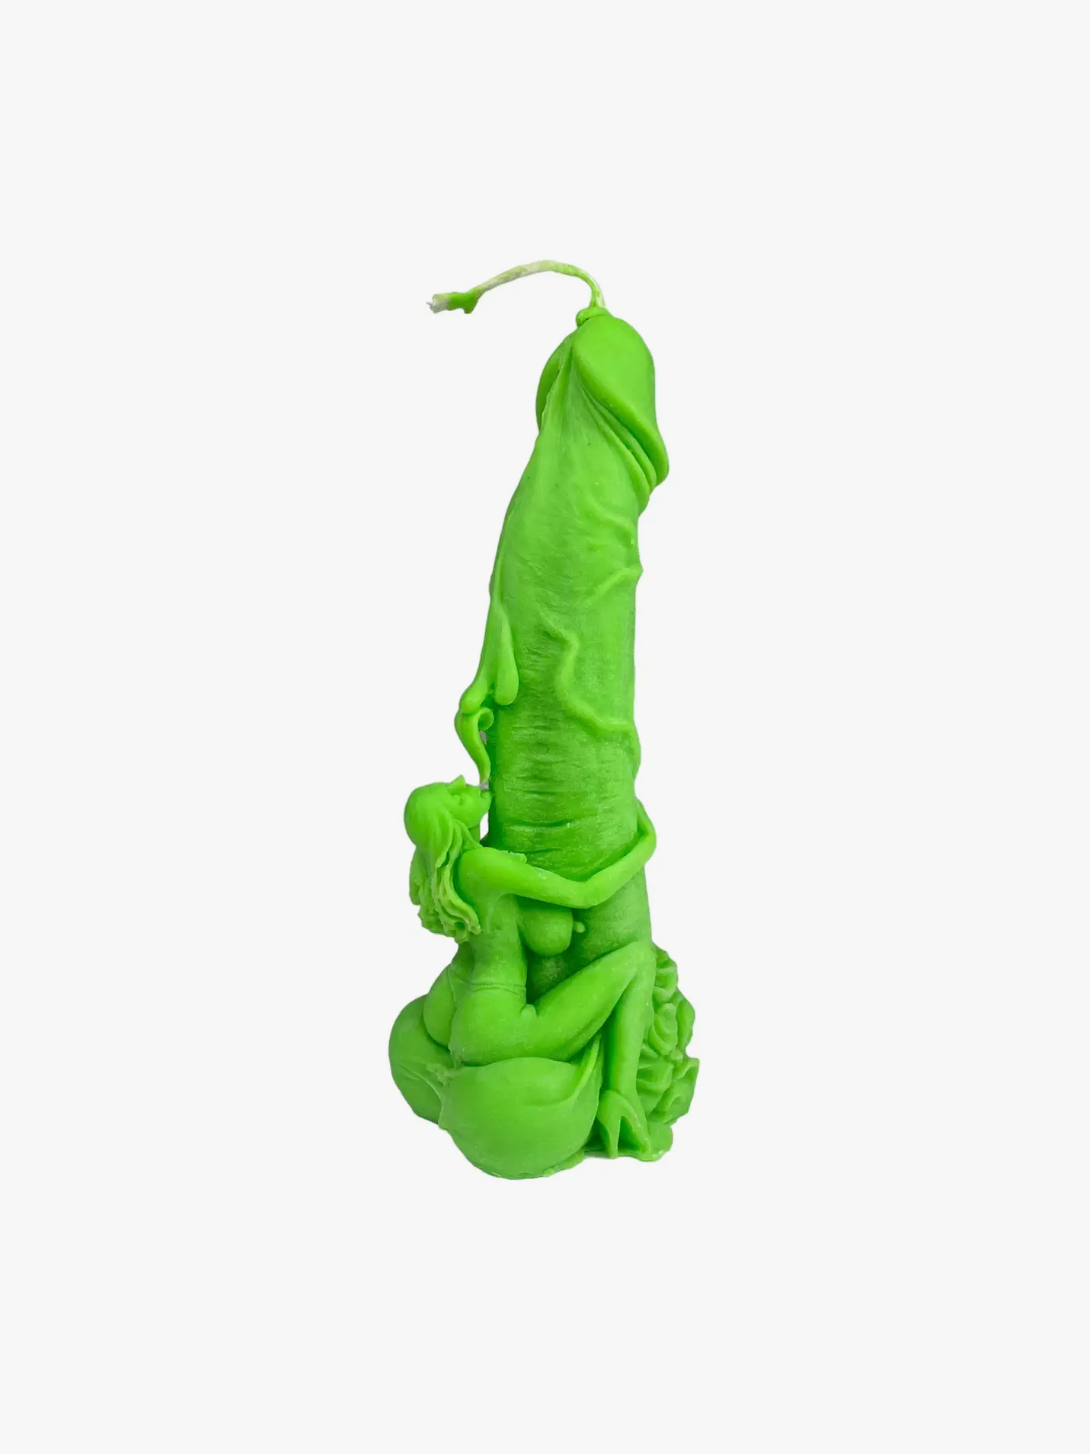 Kinky Penis Candle or Soap, Dick Cock Novelty Strippers Gift